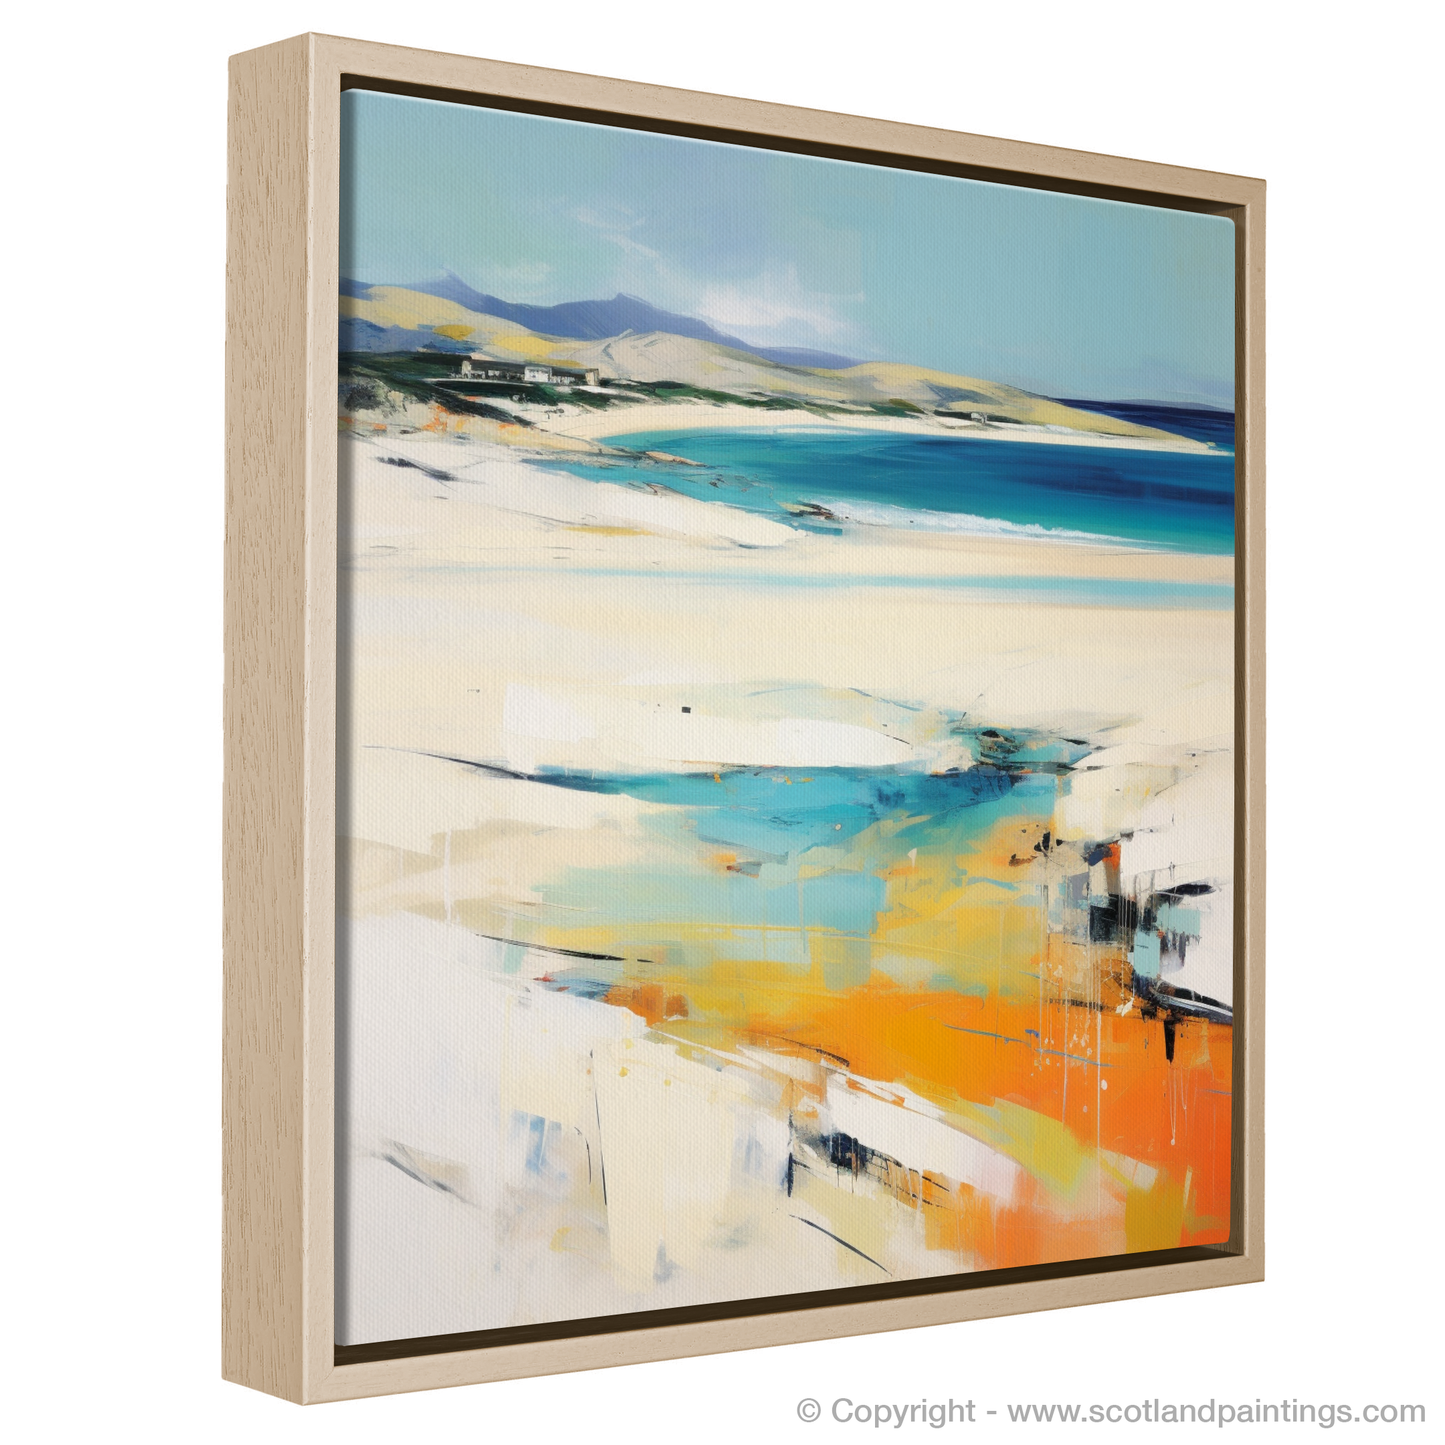 Painting and Art Print of Luskentyre Beach, Isle of Harris entitled "Ethereal Shores: An Abstract Impressionist Tribute to Luskentyre Beach".